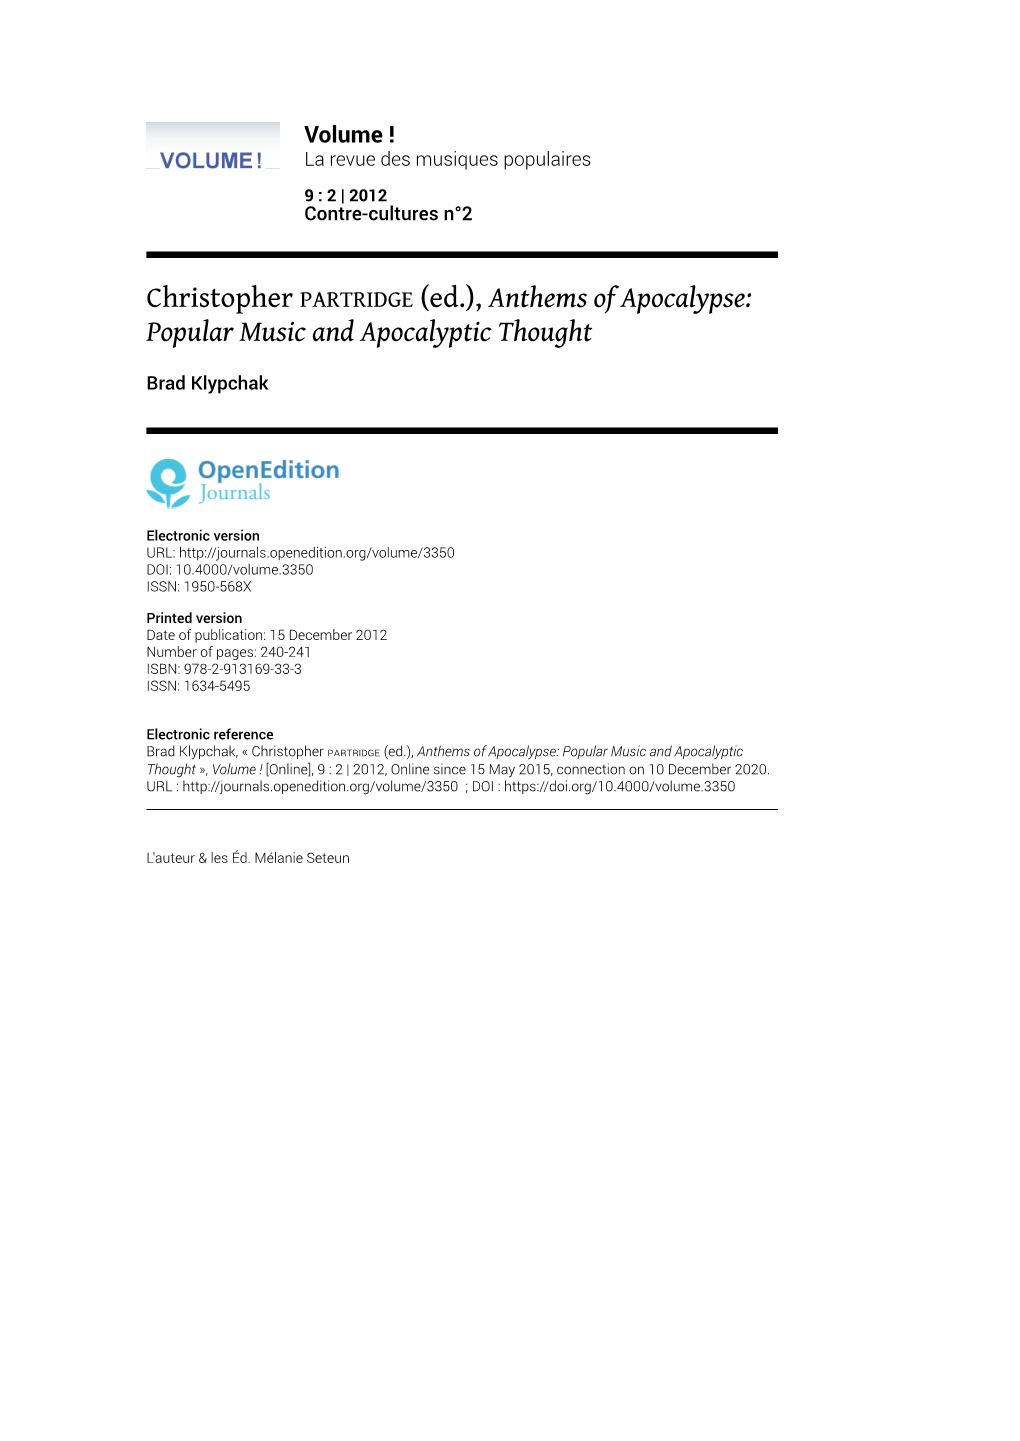 Christopher PARTRIDGE (Ed.), Anthems of Apocalypse: Popular Music and Apocalyptic Thought